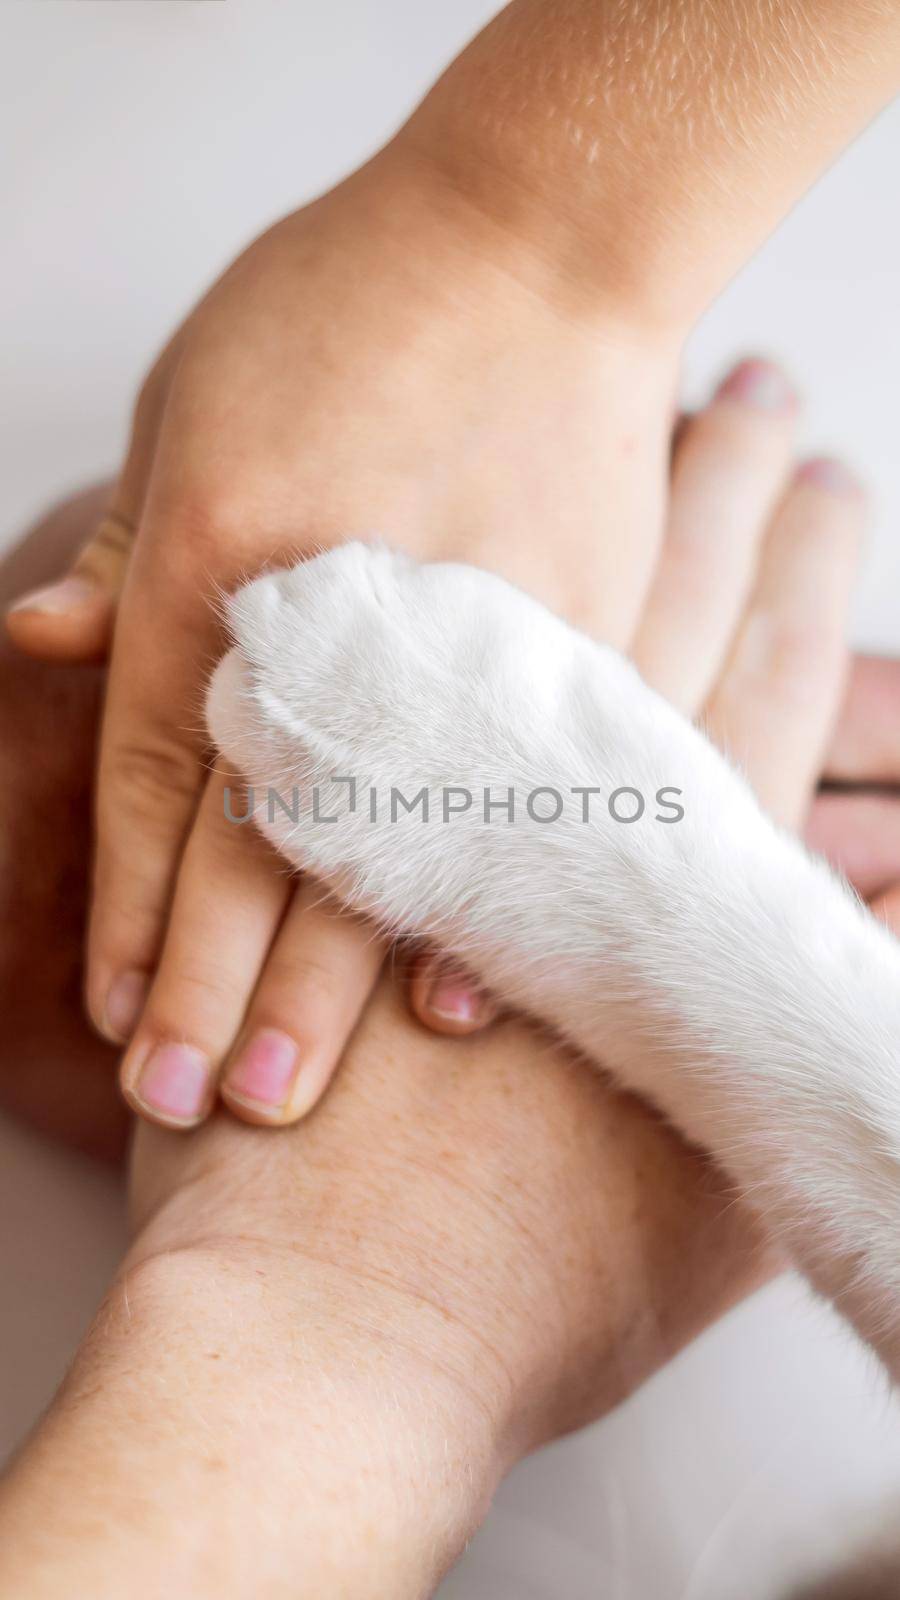 The hands of the family and the furry paw of the cat as a team. Fighting for animal rights, helping animals. VERTICAL FORMAT for Instagram mobile story or stories size. Mobile wallpaper